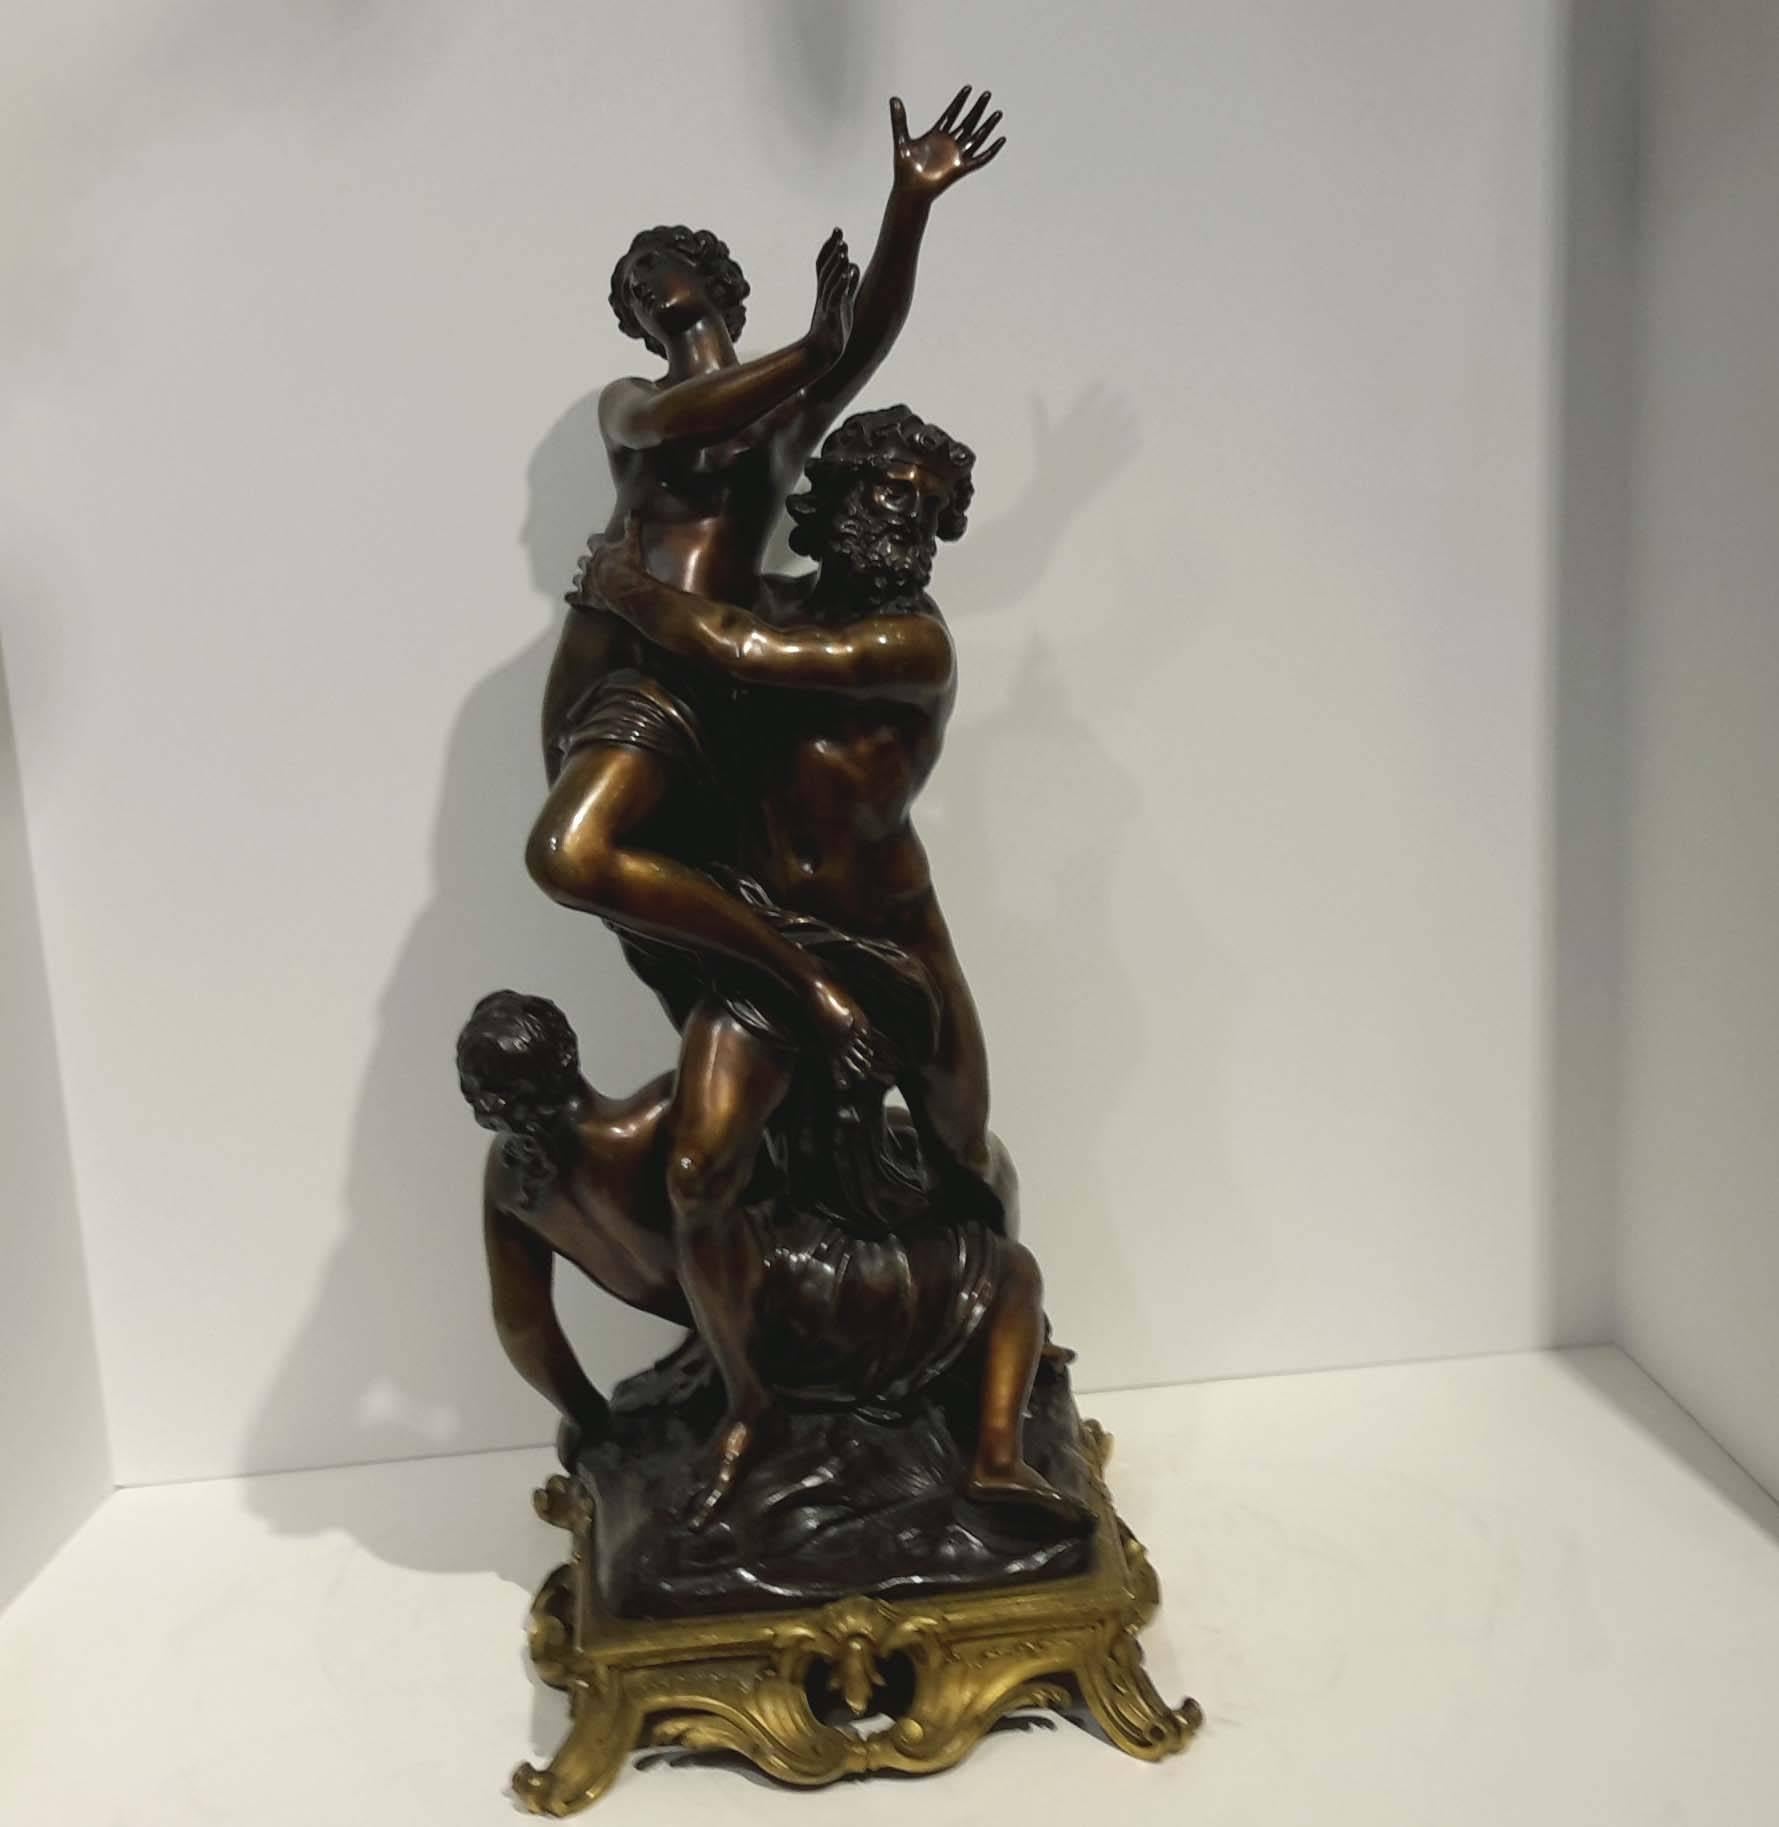 Mounted on an ormolu pierced scroll and rock base. Based on Francois Giradon's great bronze group "L'Enlevement de Proserpine" was cast for the garden at Versaillles 1694-1699. Much influenced by Giambologna, reductions remain popular. In